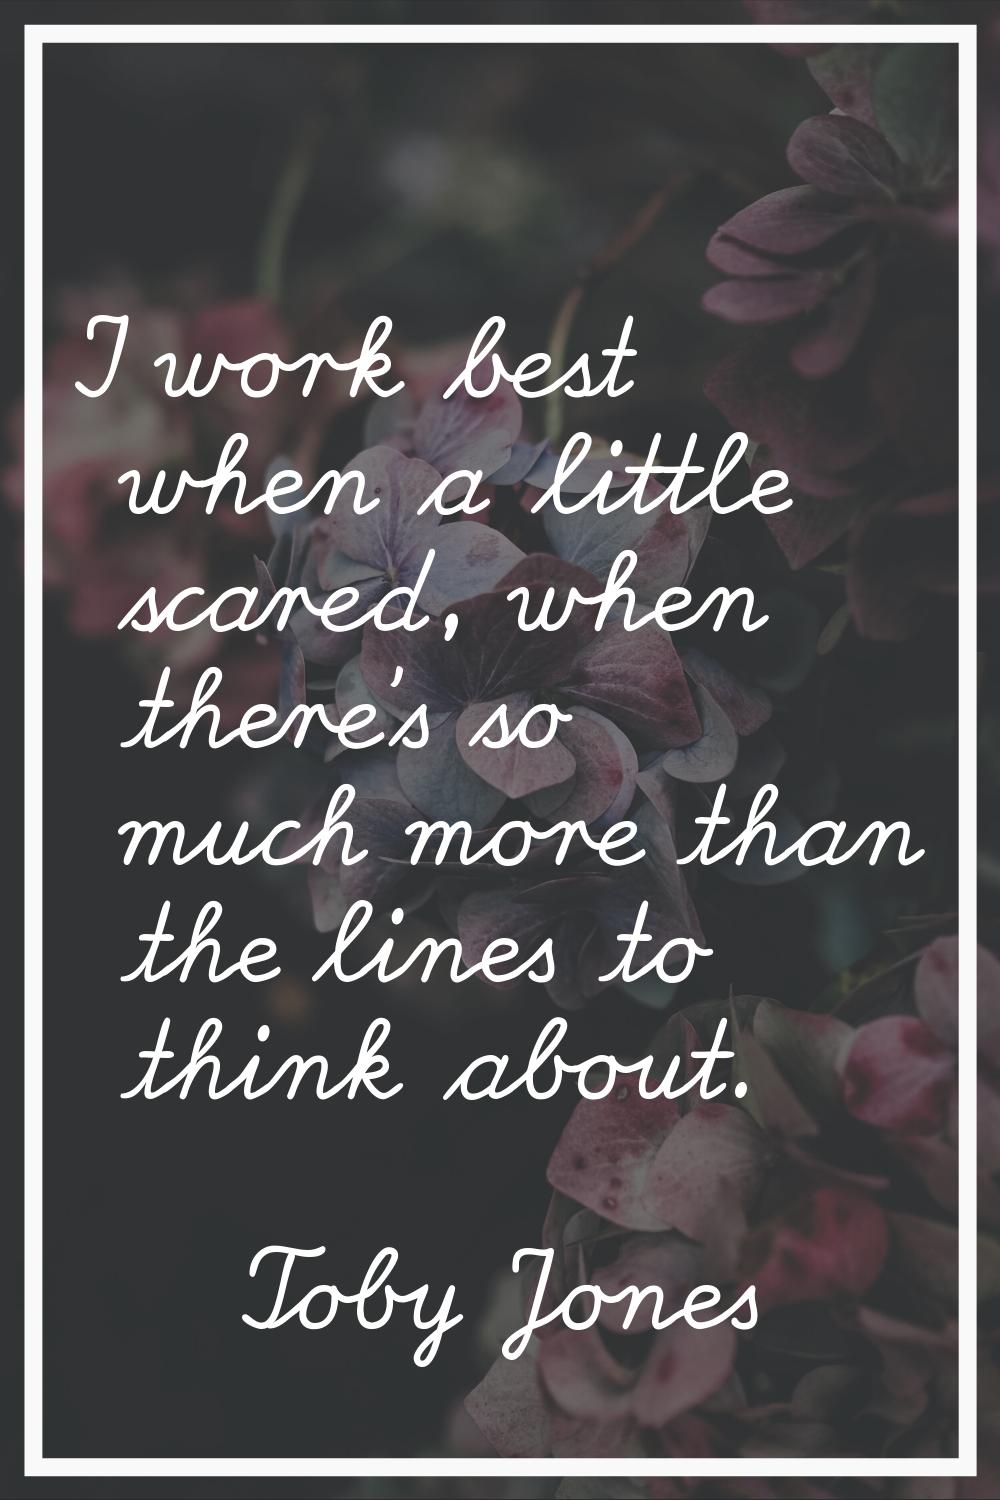 I work best when a little scared, when there's so much more than the lines to think about.